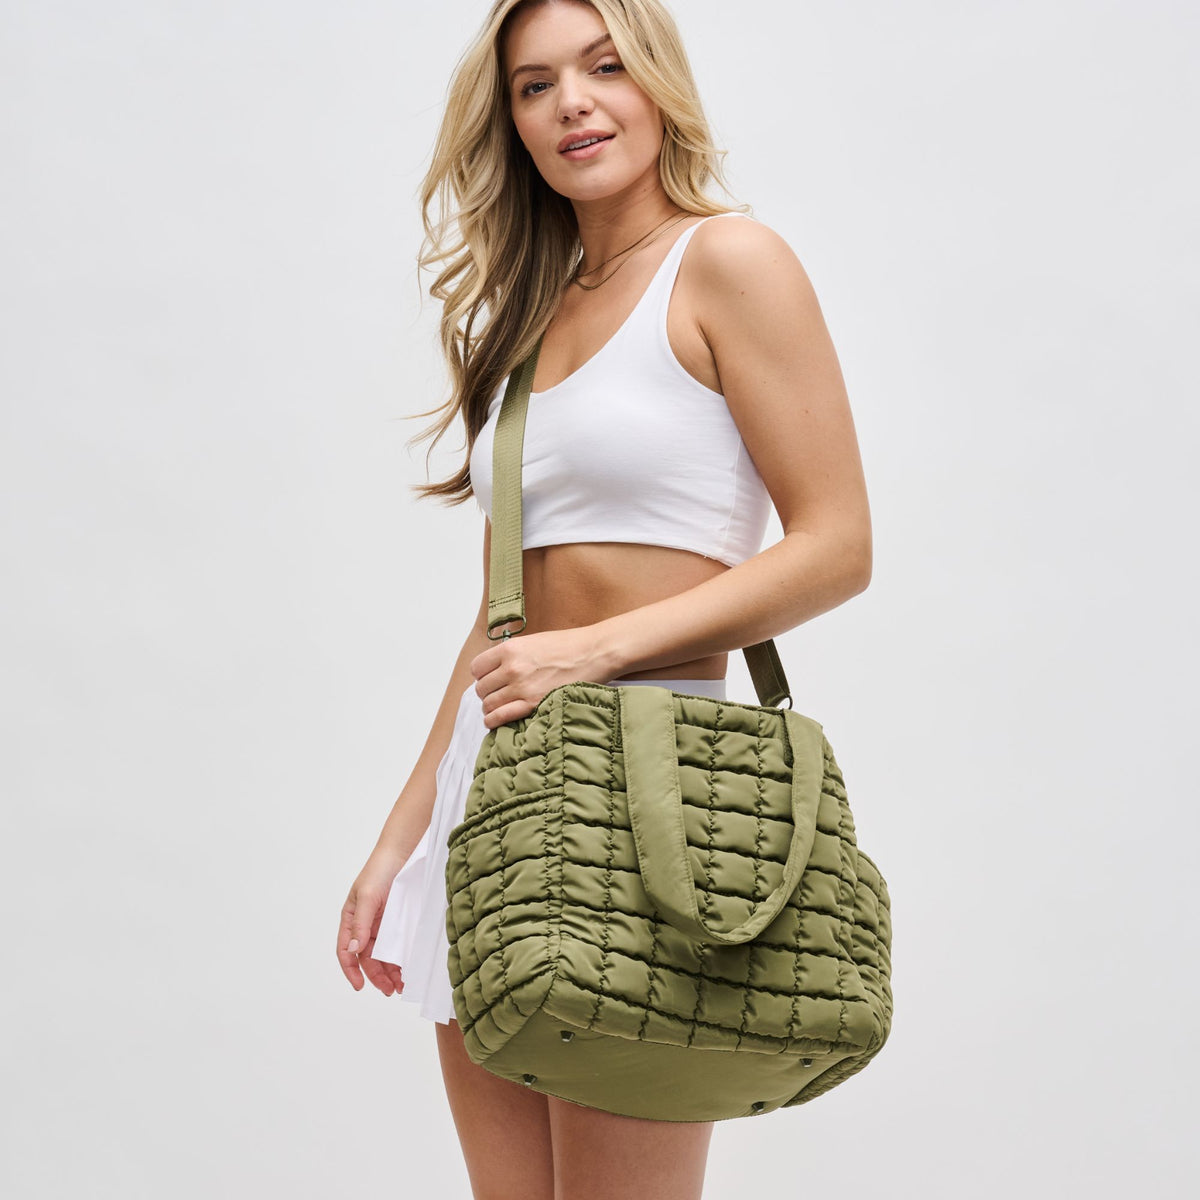 Woman wearing Olive Sol and Selene Dreamer Tote 841764109444 View 1 | Olive